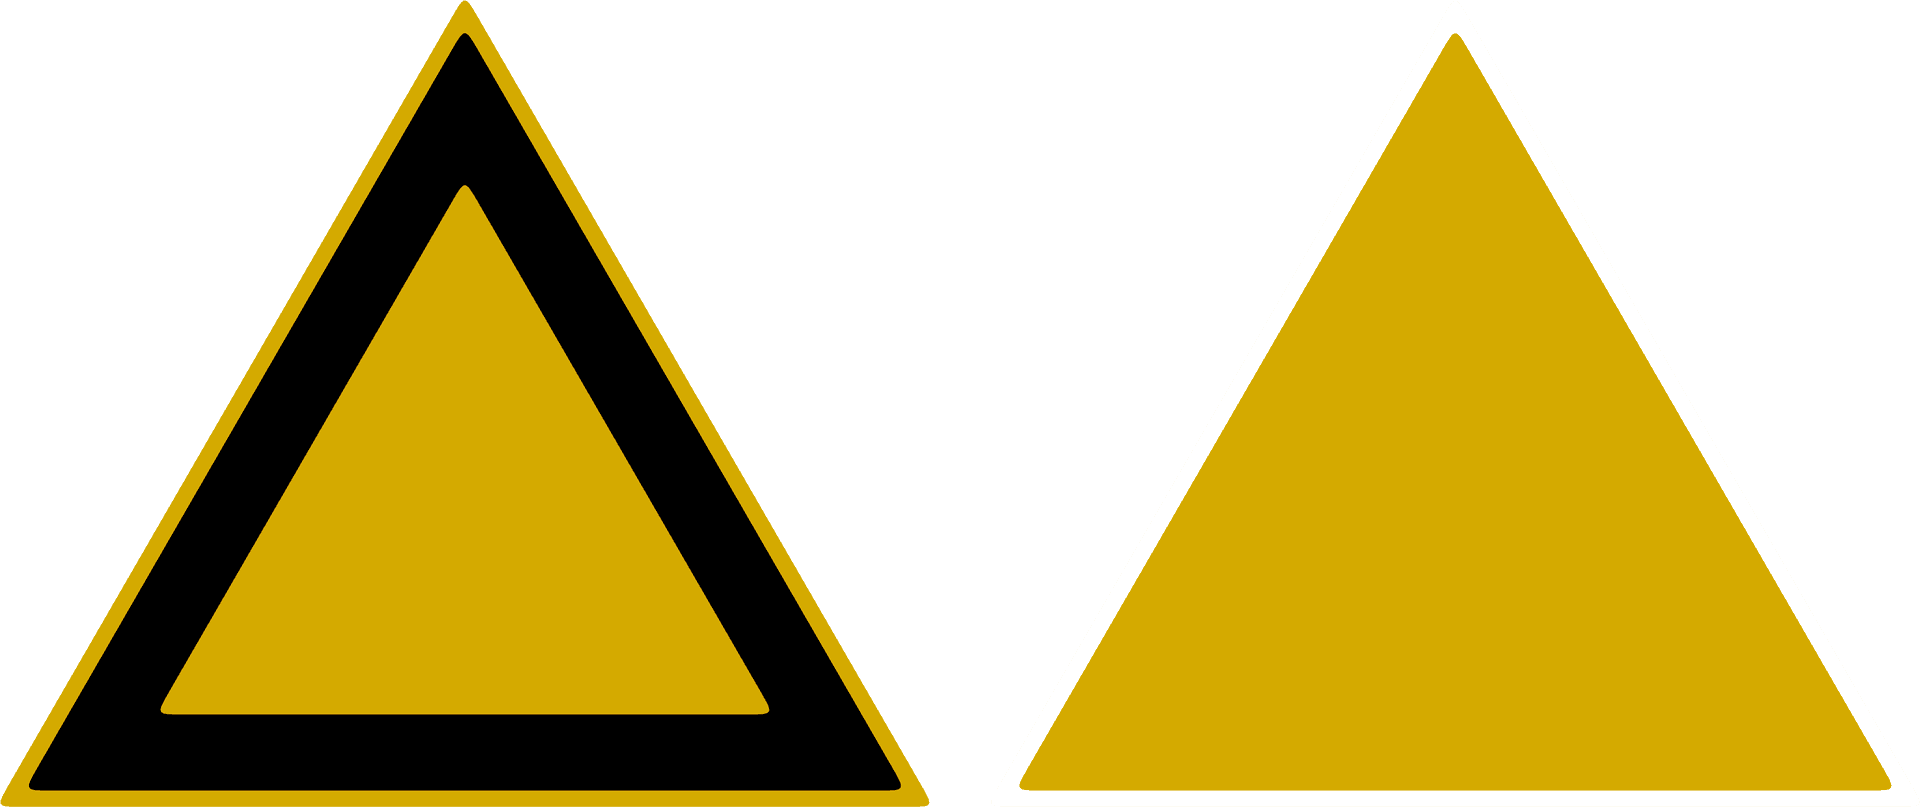 Yellow Triangles Black Border PNG